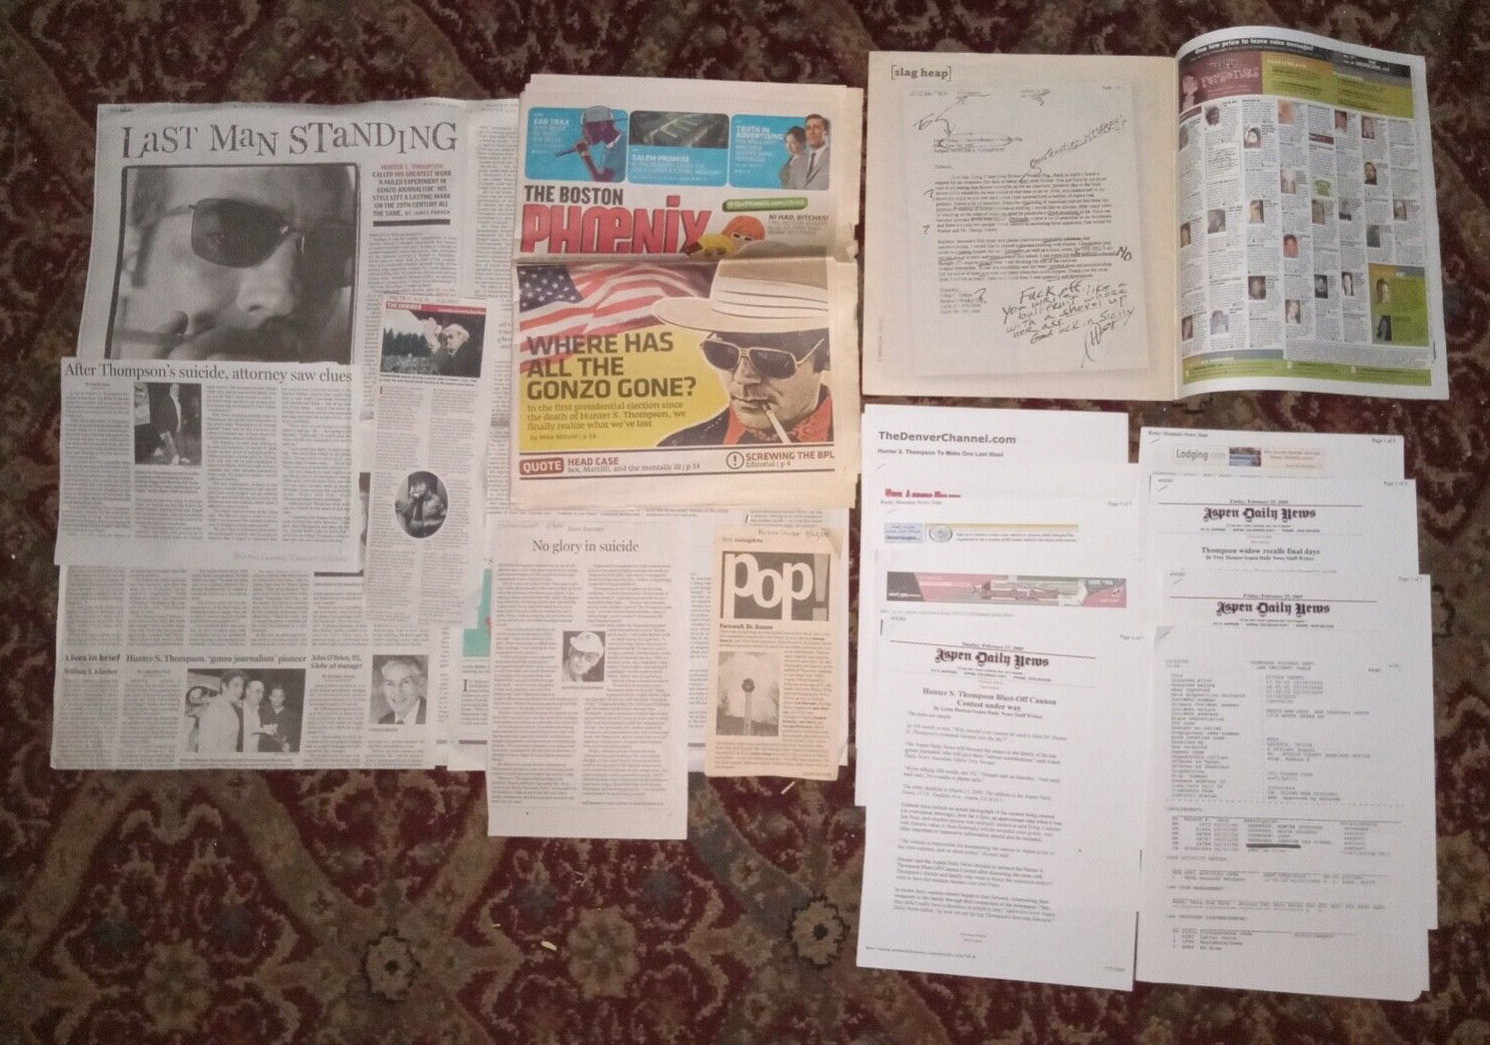 Hunter S. Thompson memorial archive - newspaper articles clippings